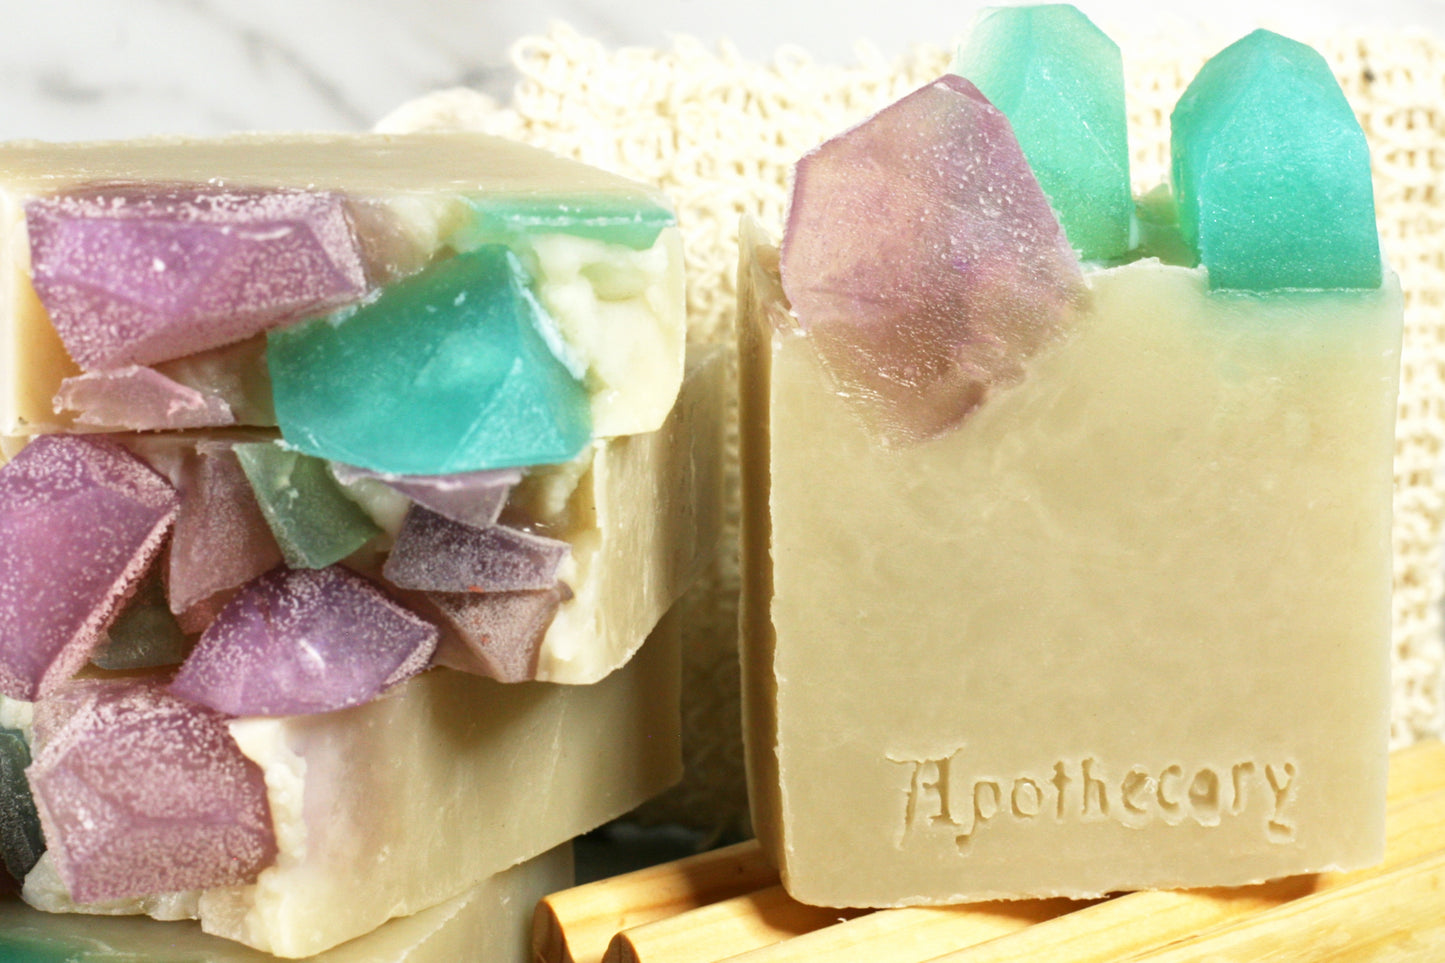 Crystal cavern soap is silvery grey with shining crystals hand cut from soap on top